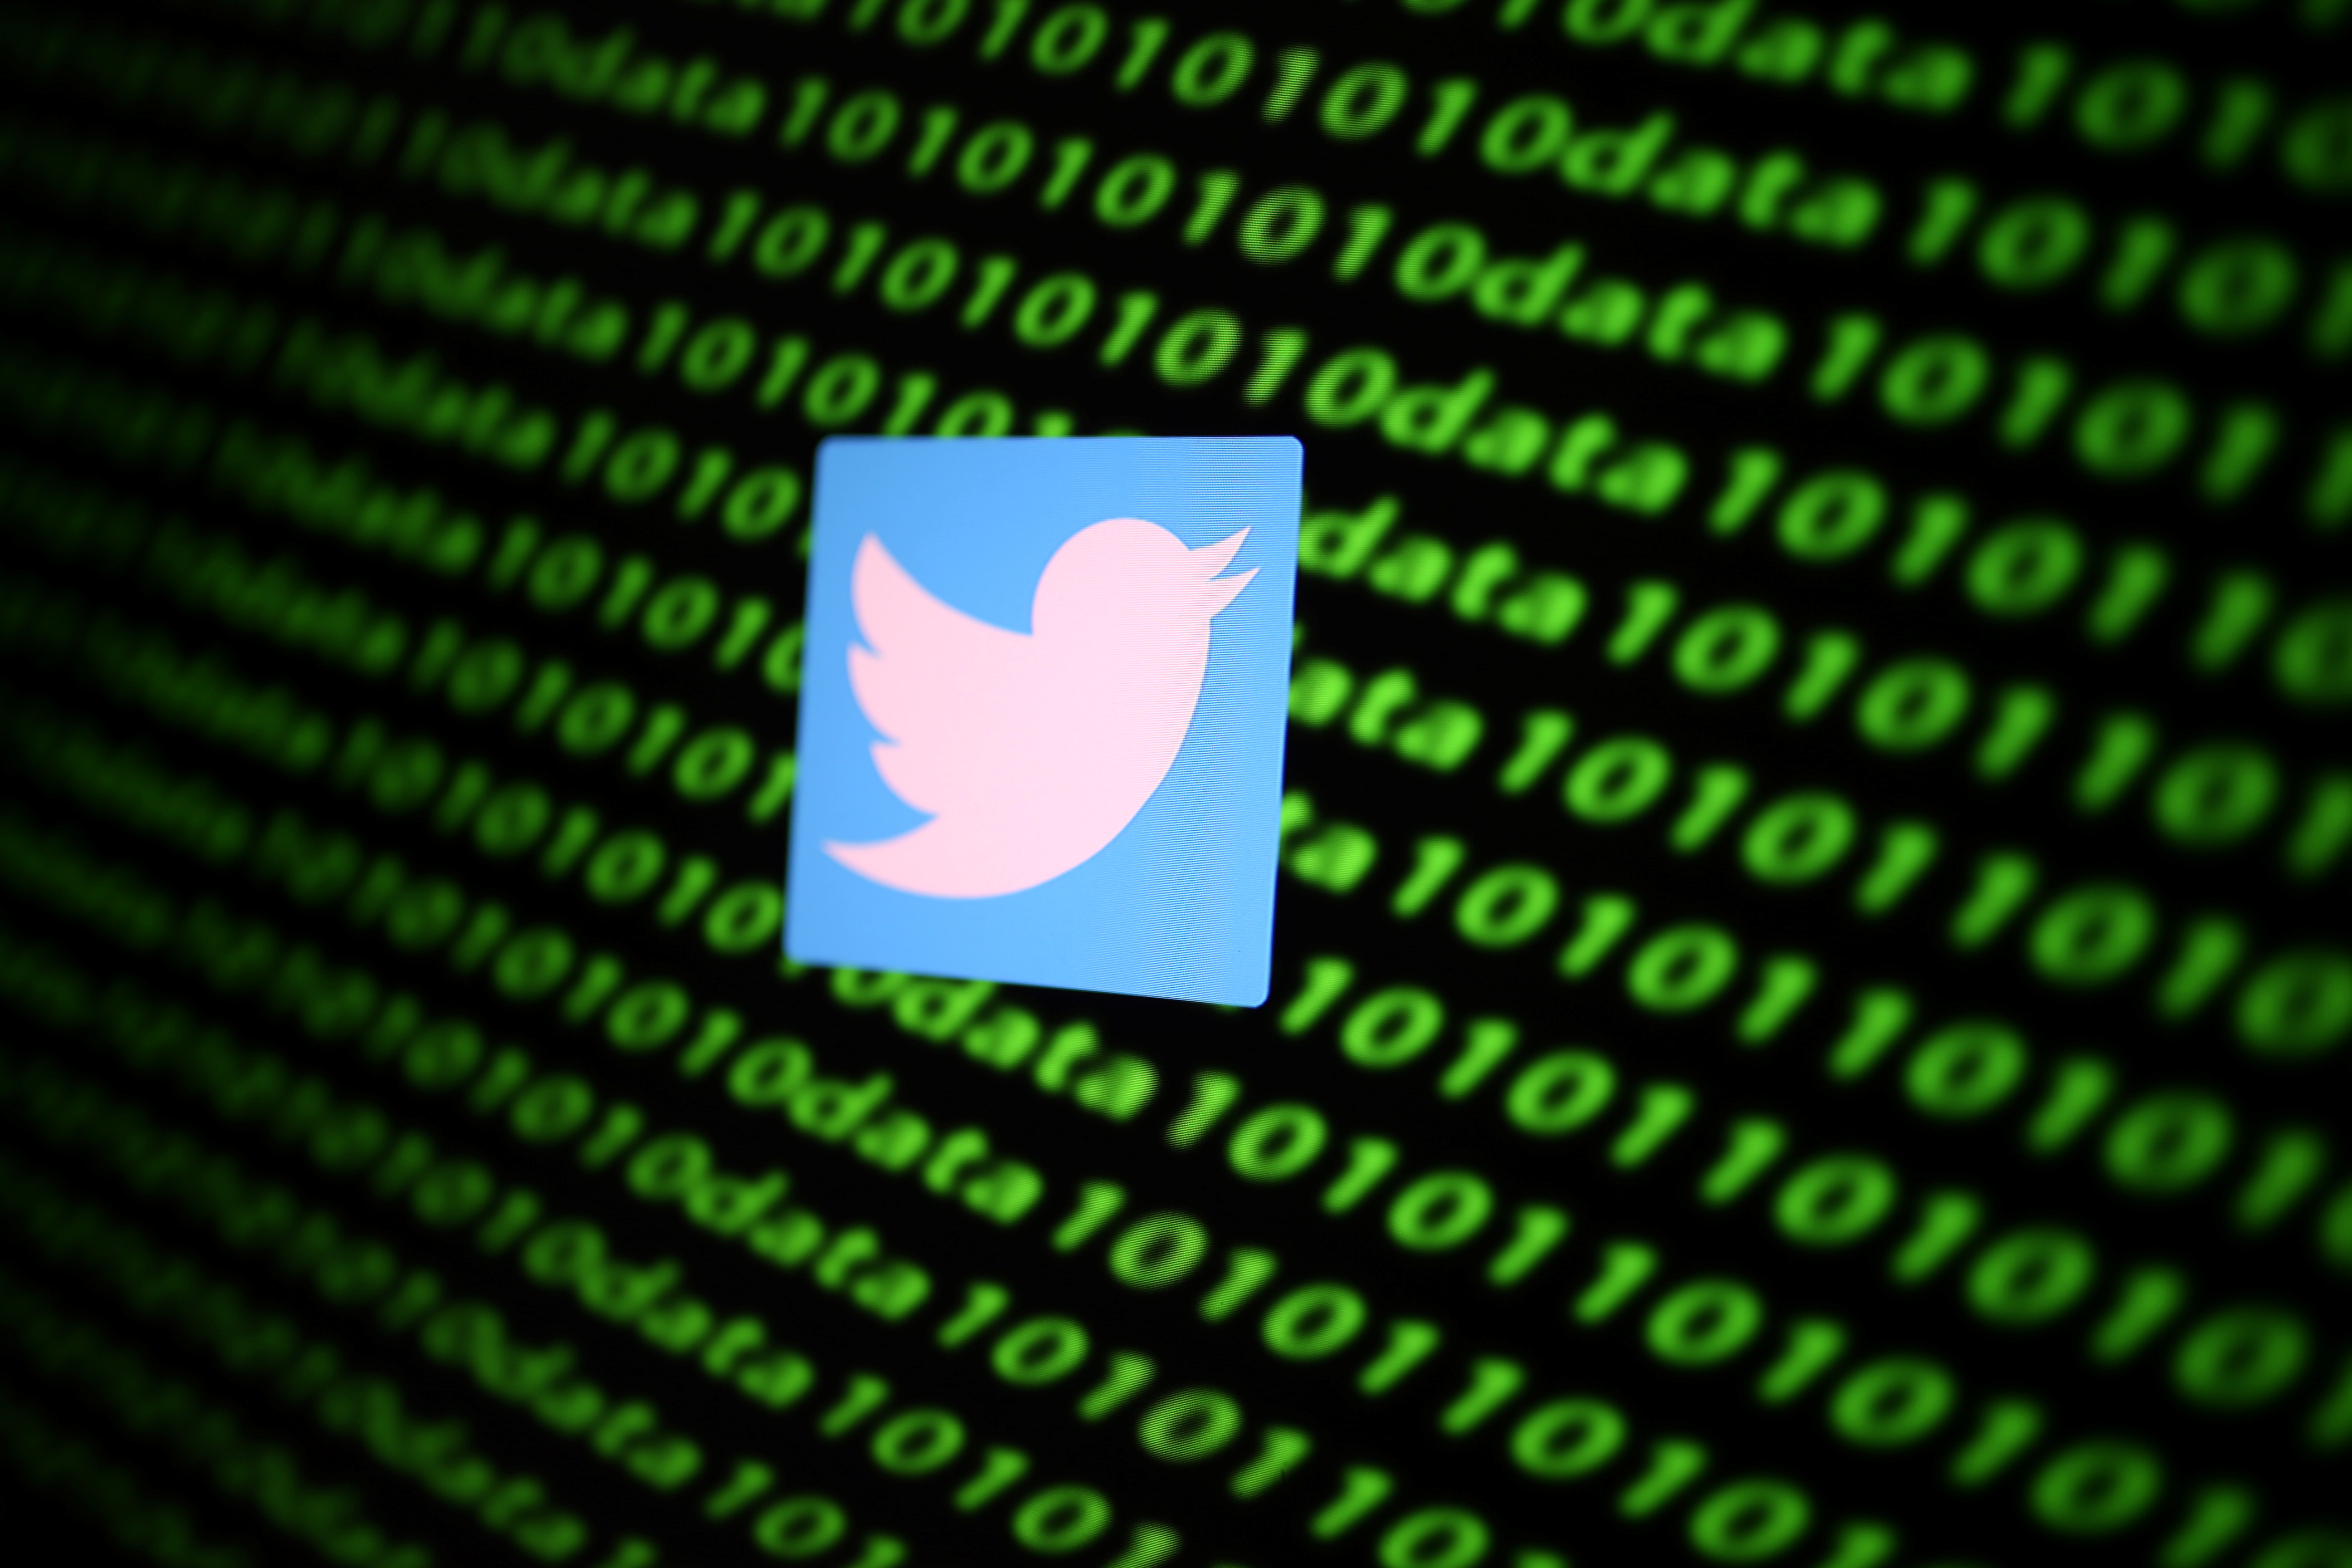 The Twitter logo and binary cyber codes are seen in this illustration